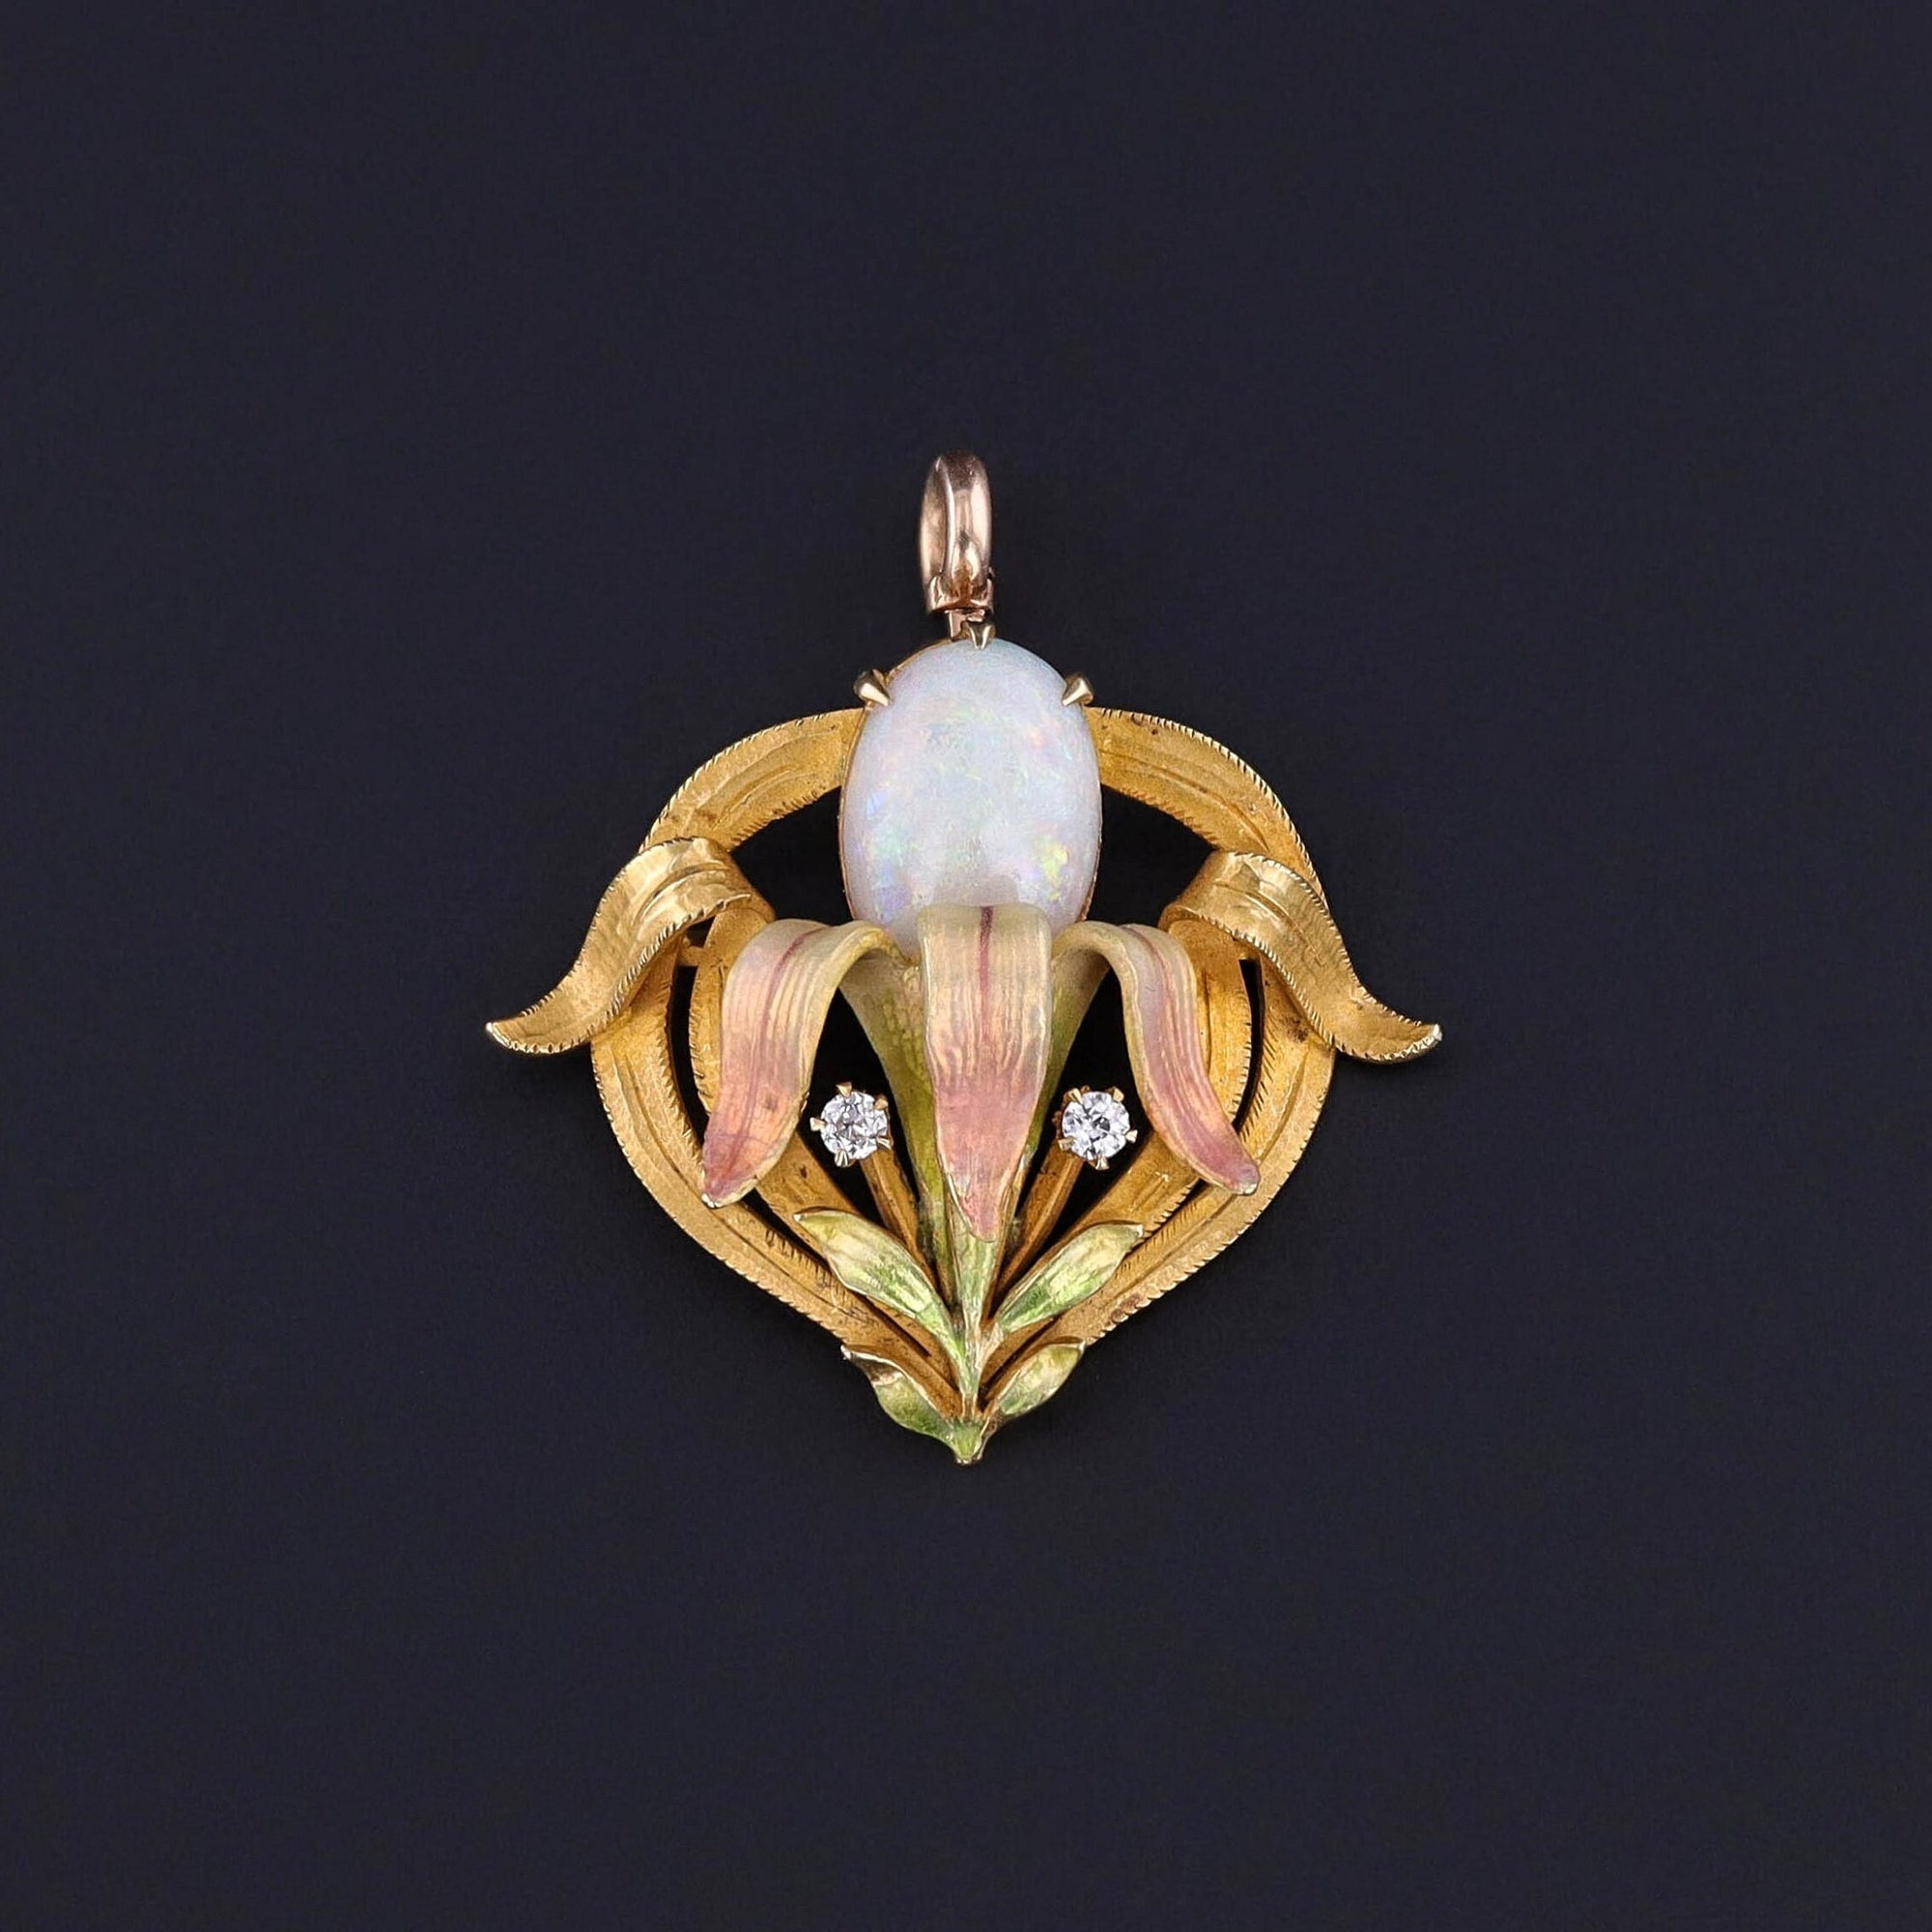 Antique Opal Flower Pendant: Step into the elegance of the early 20th century with this Art Nouveau era jewel featuring a graceful opal iris adorned with pink and green enamel and two sparkling diamond accents.